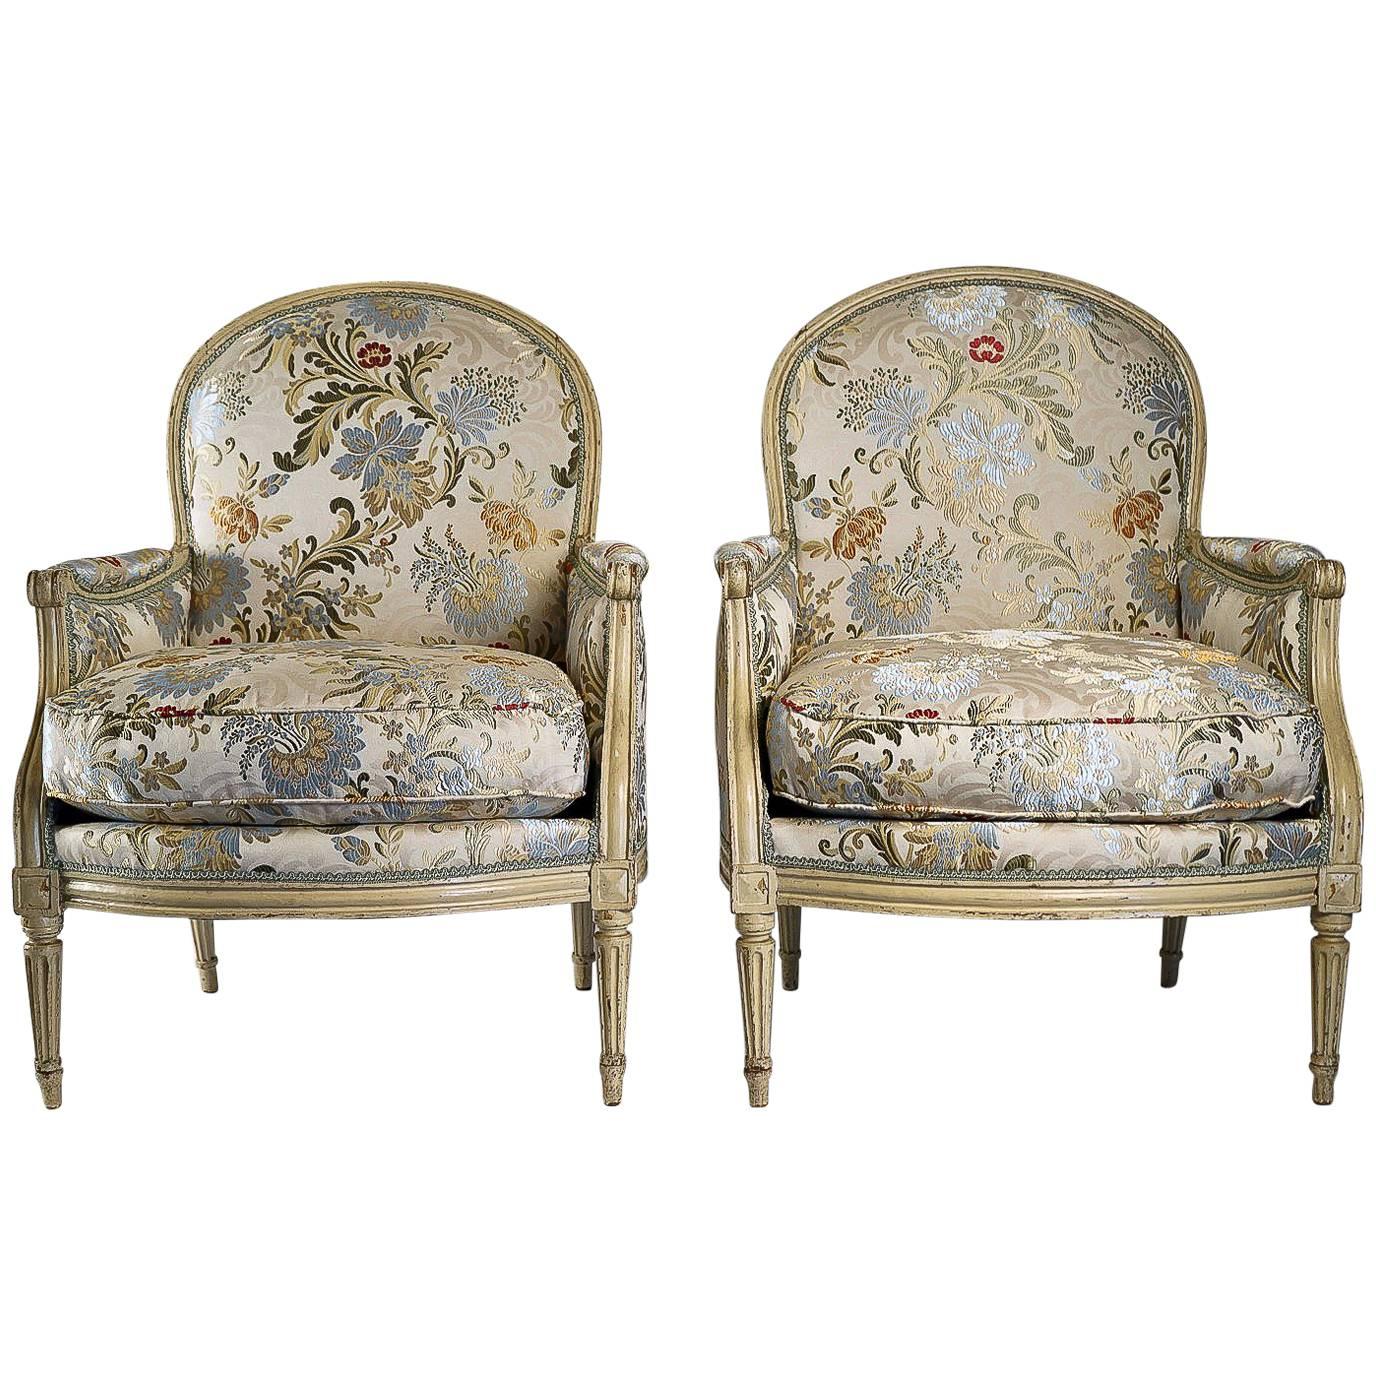 French 18th Century Lacquered Wood Pair of Large Bergeres Louis XVI Period, 1780 For Sale